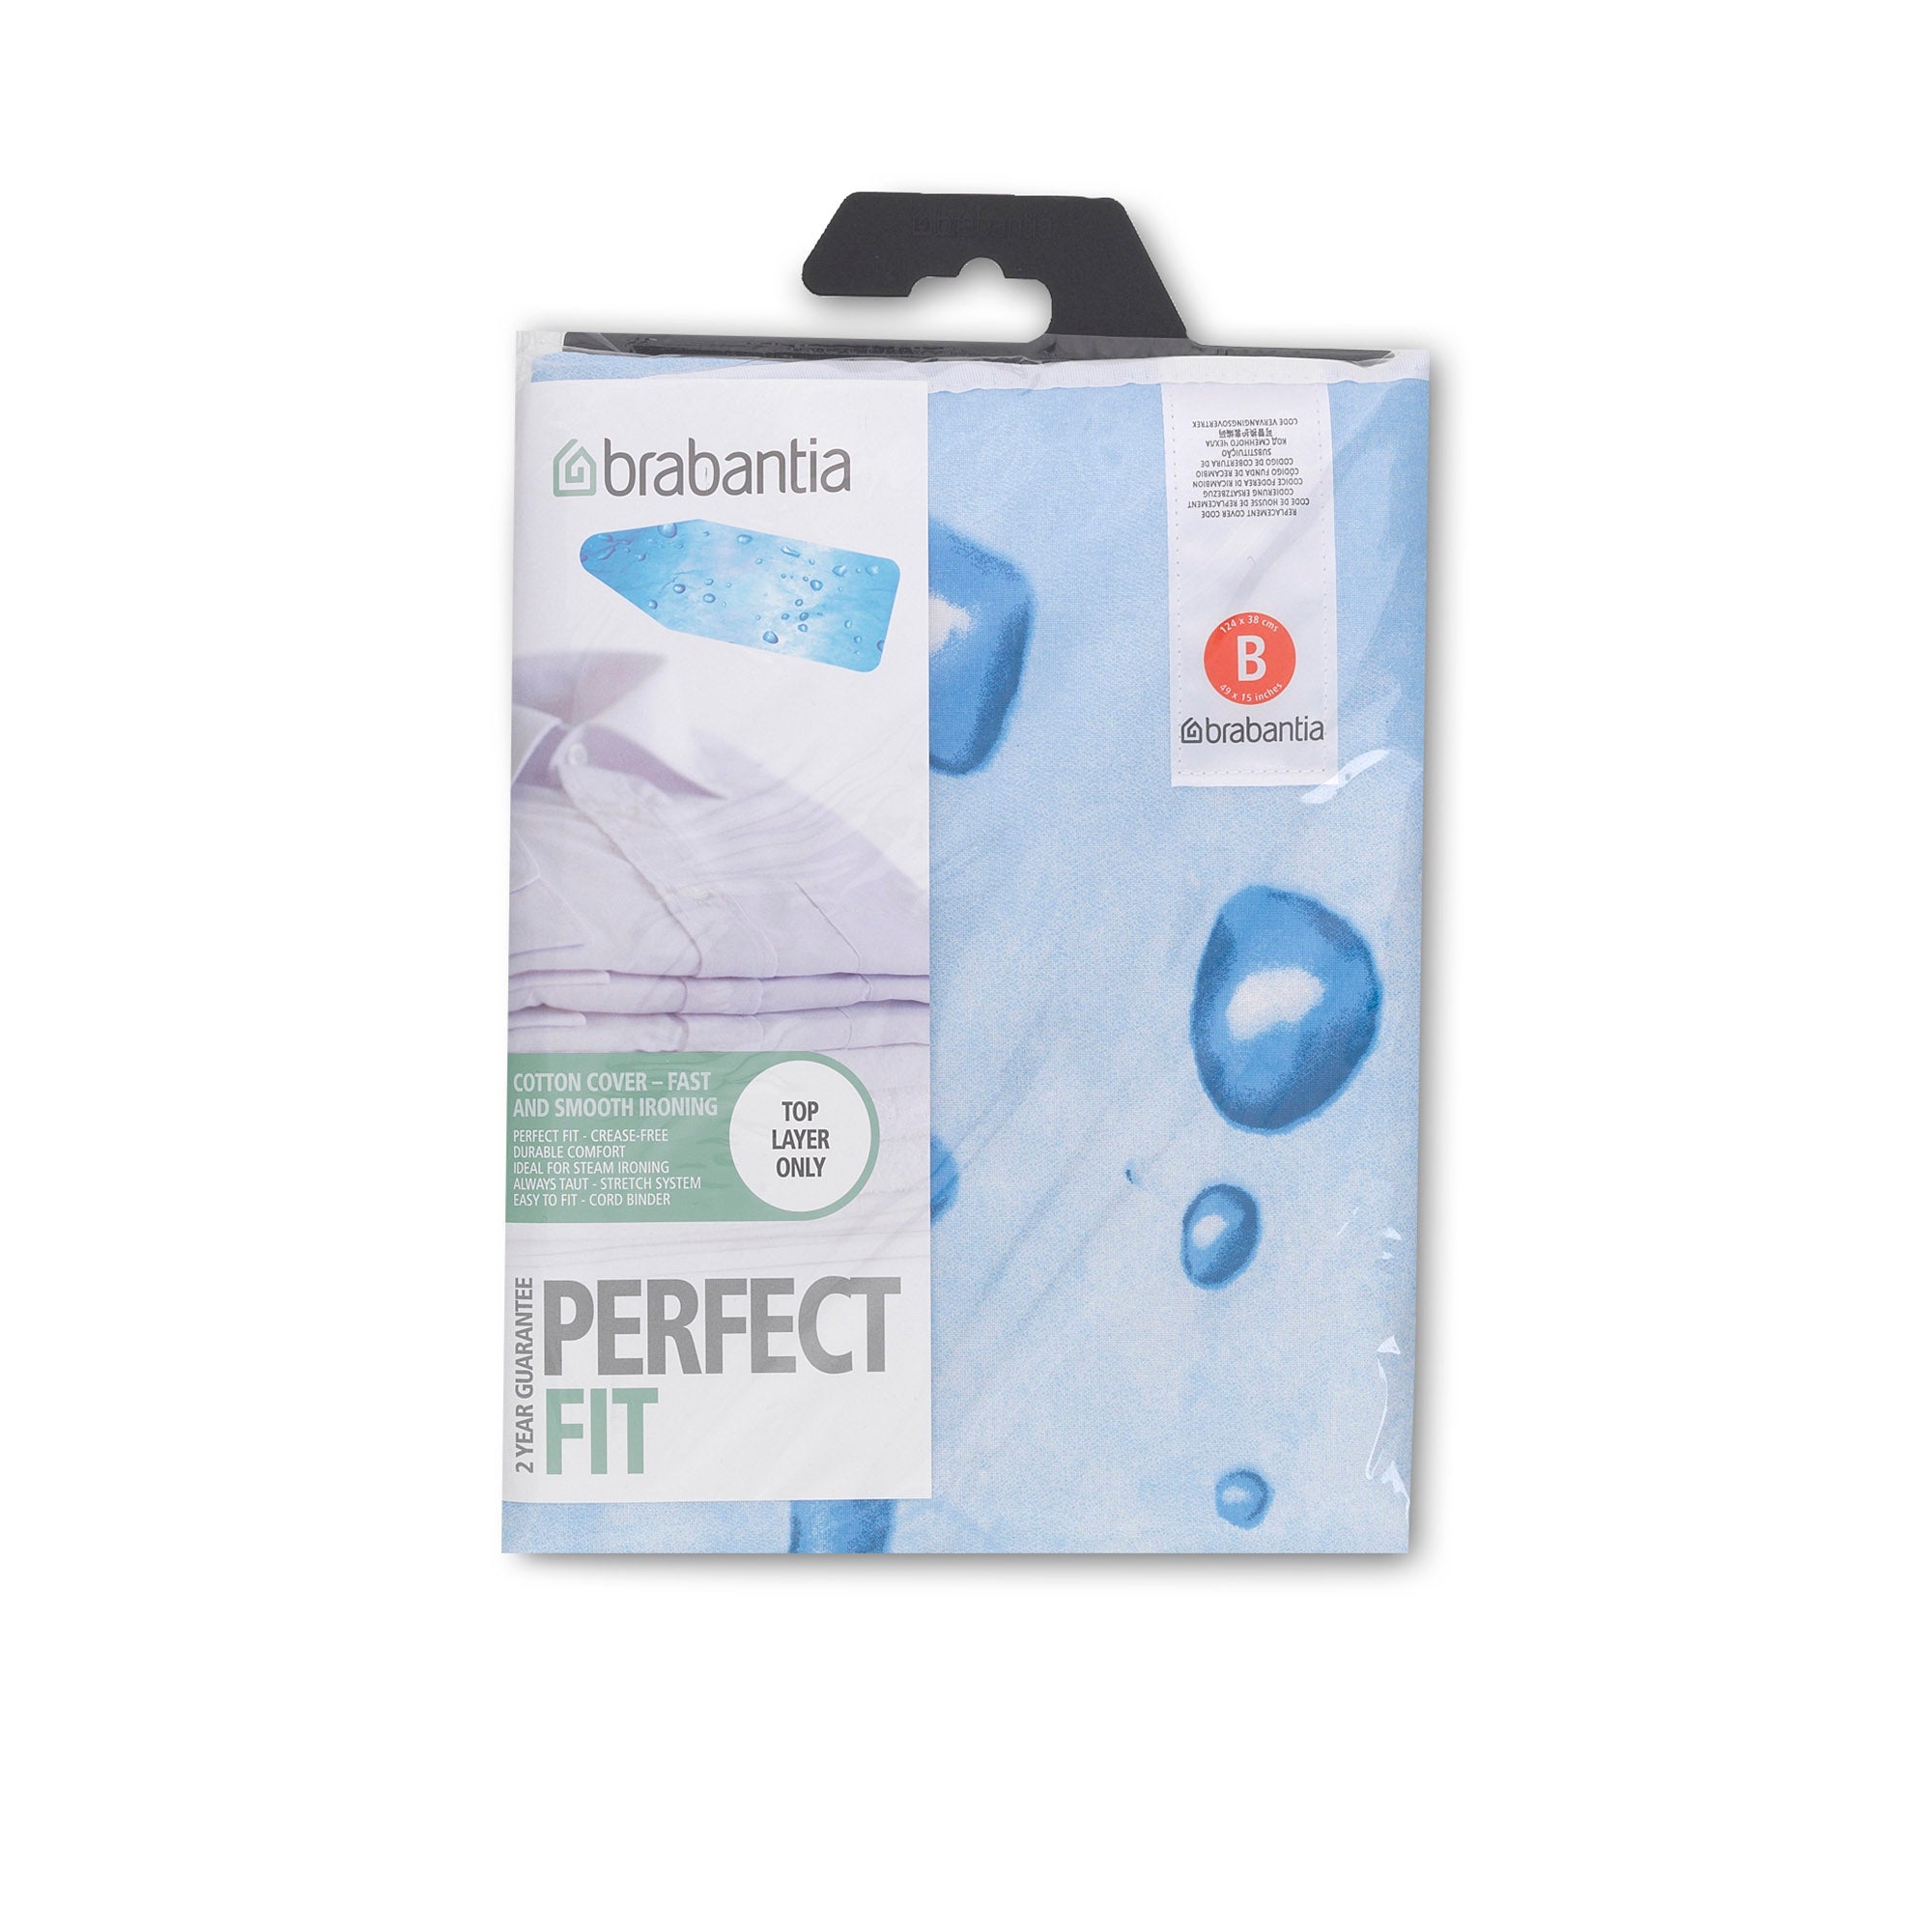 Brabantia Ironing Board Cover And Replacement Felt Pad Bundle Size B Metallised Silver Amazon Co Uk Kitchen Home